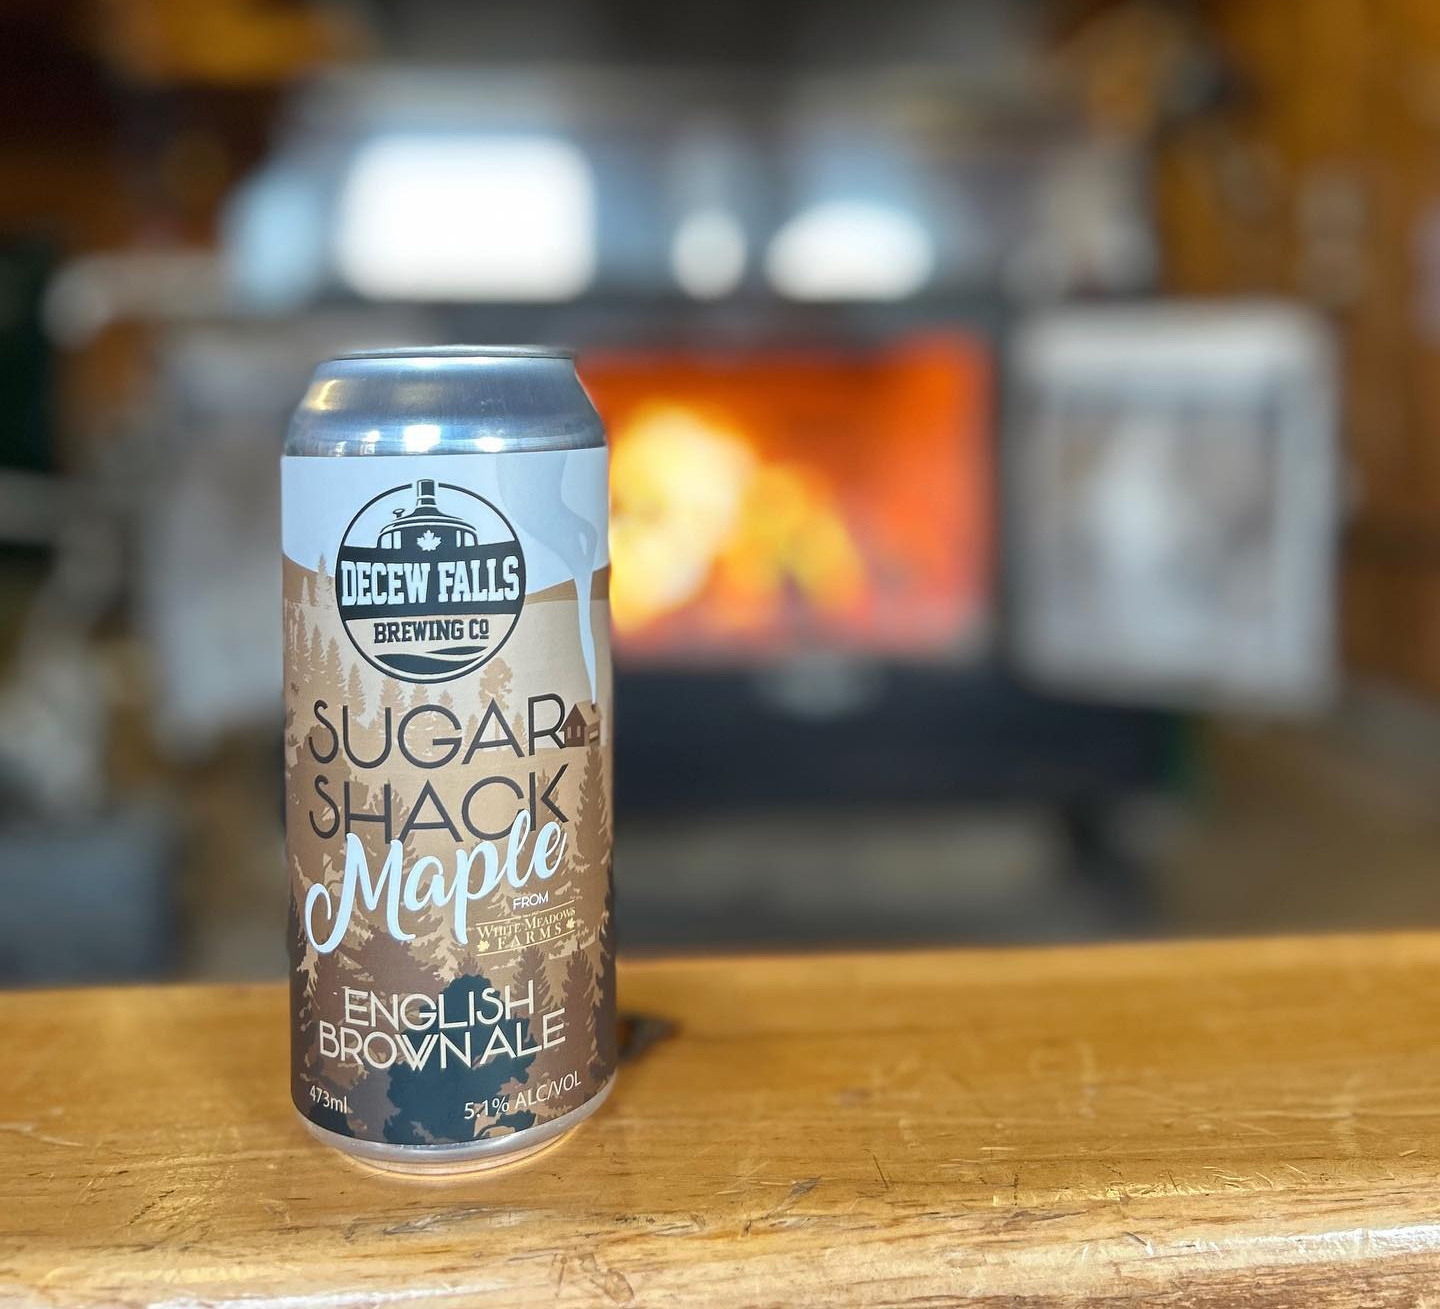 Local Business Collaboration – White Meadows Farms Maple Ale by Decew Falls Brewing Co.